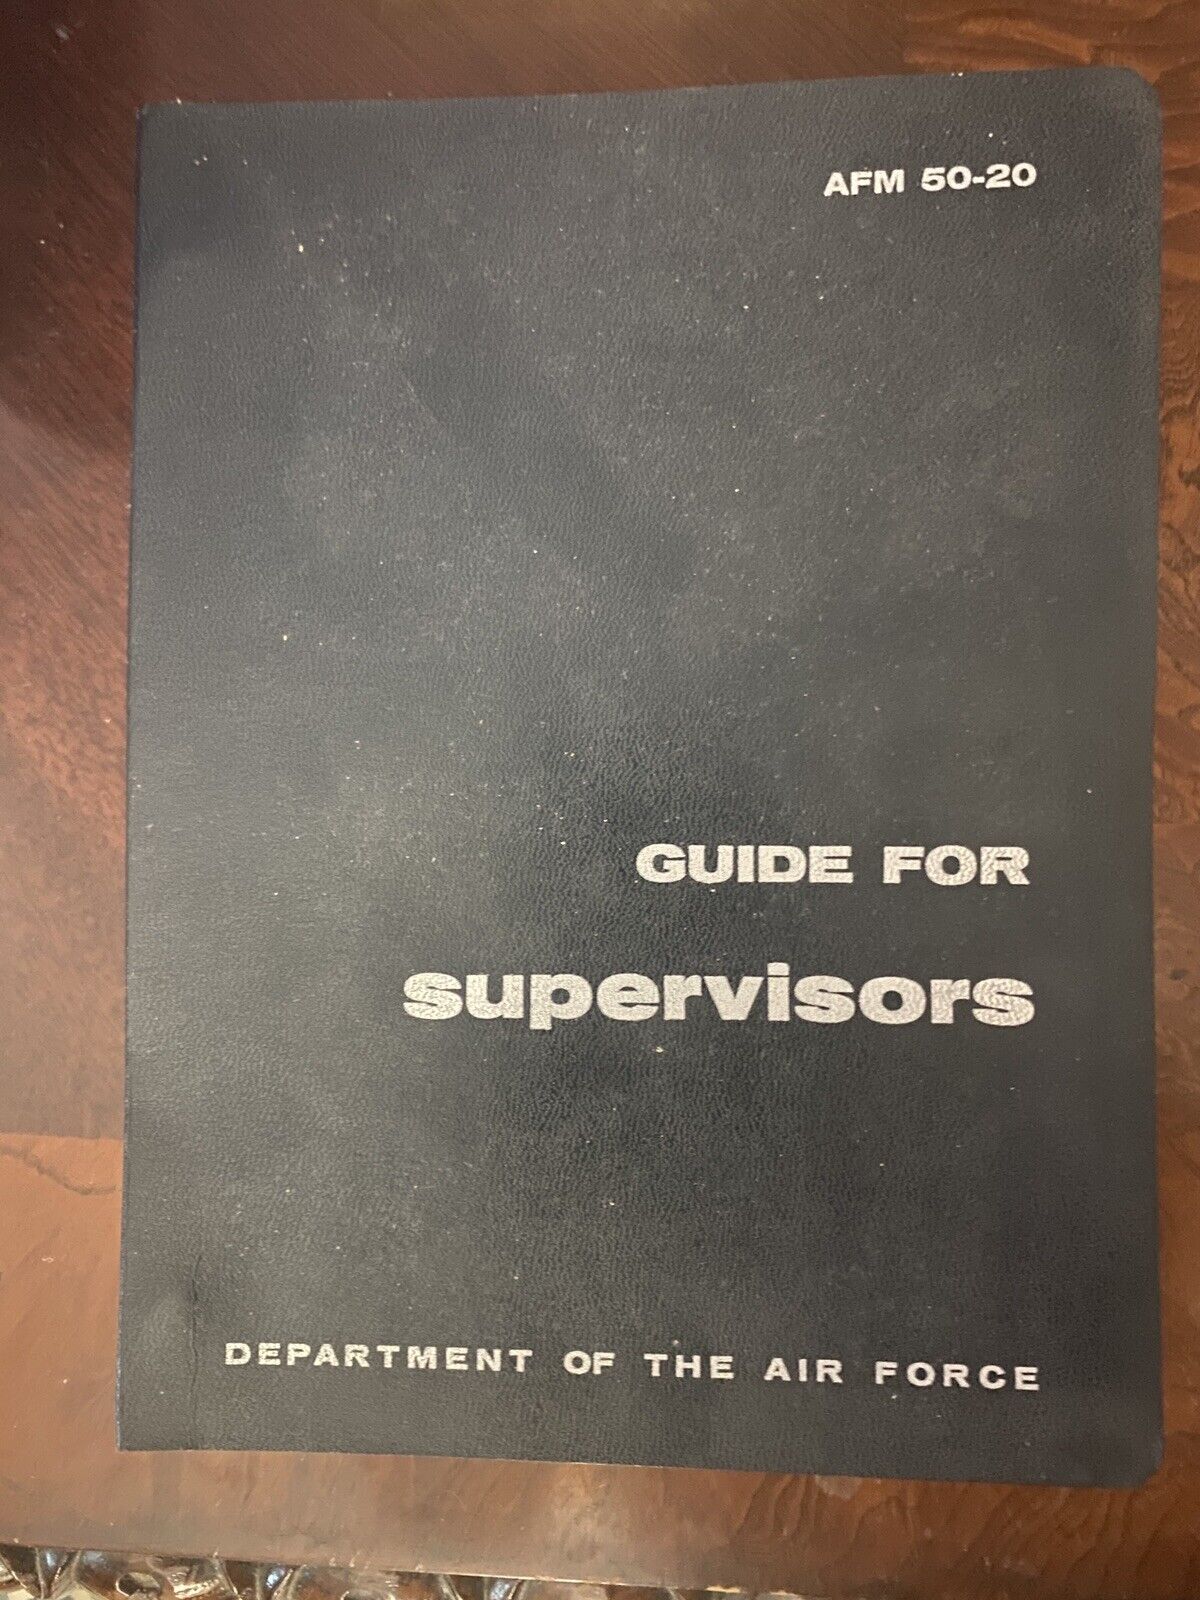 Vintage 1955 guide for supervisors Department of the Air Force AFM 50-20 